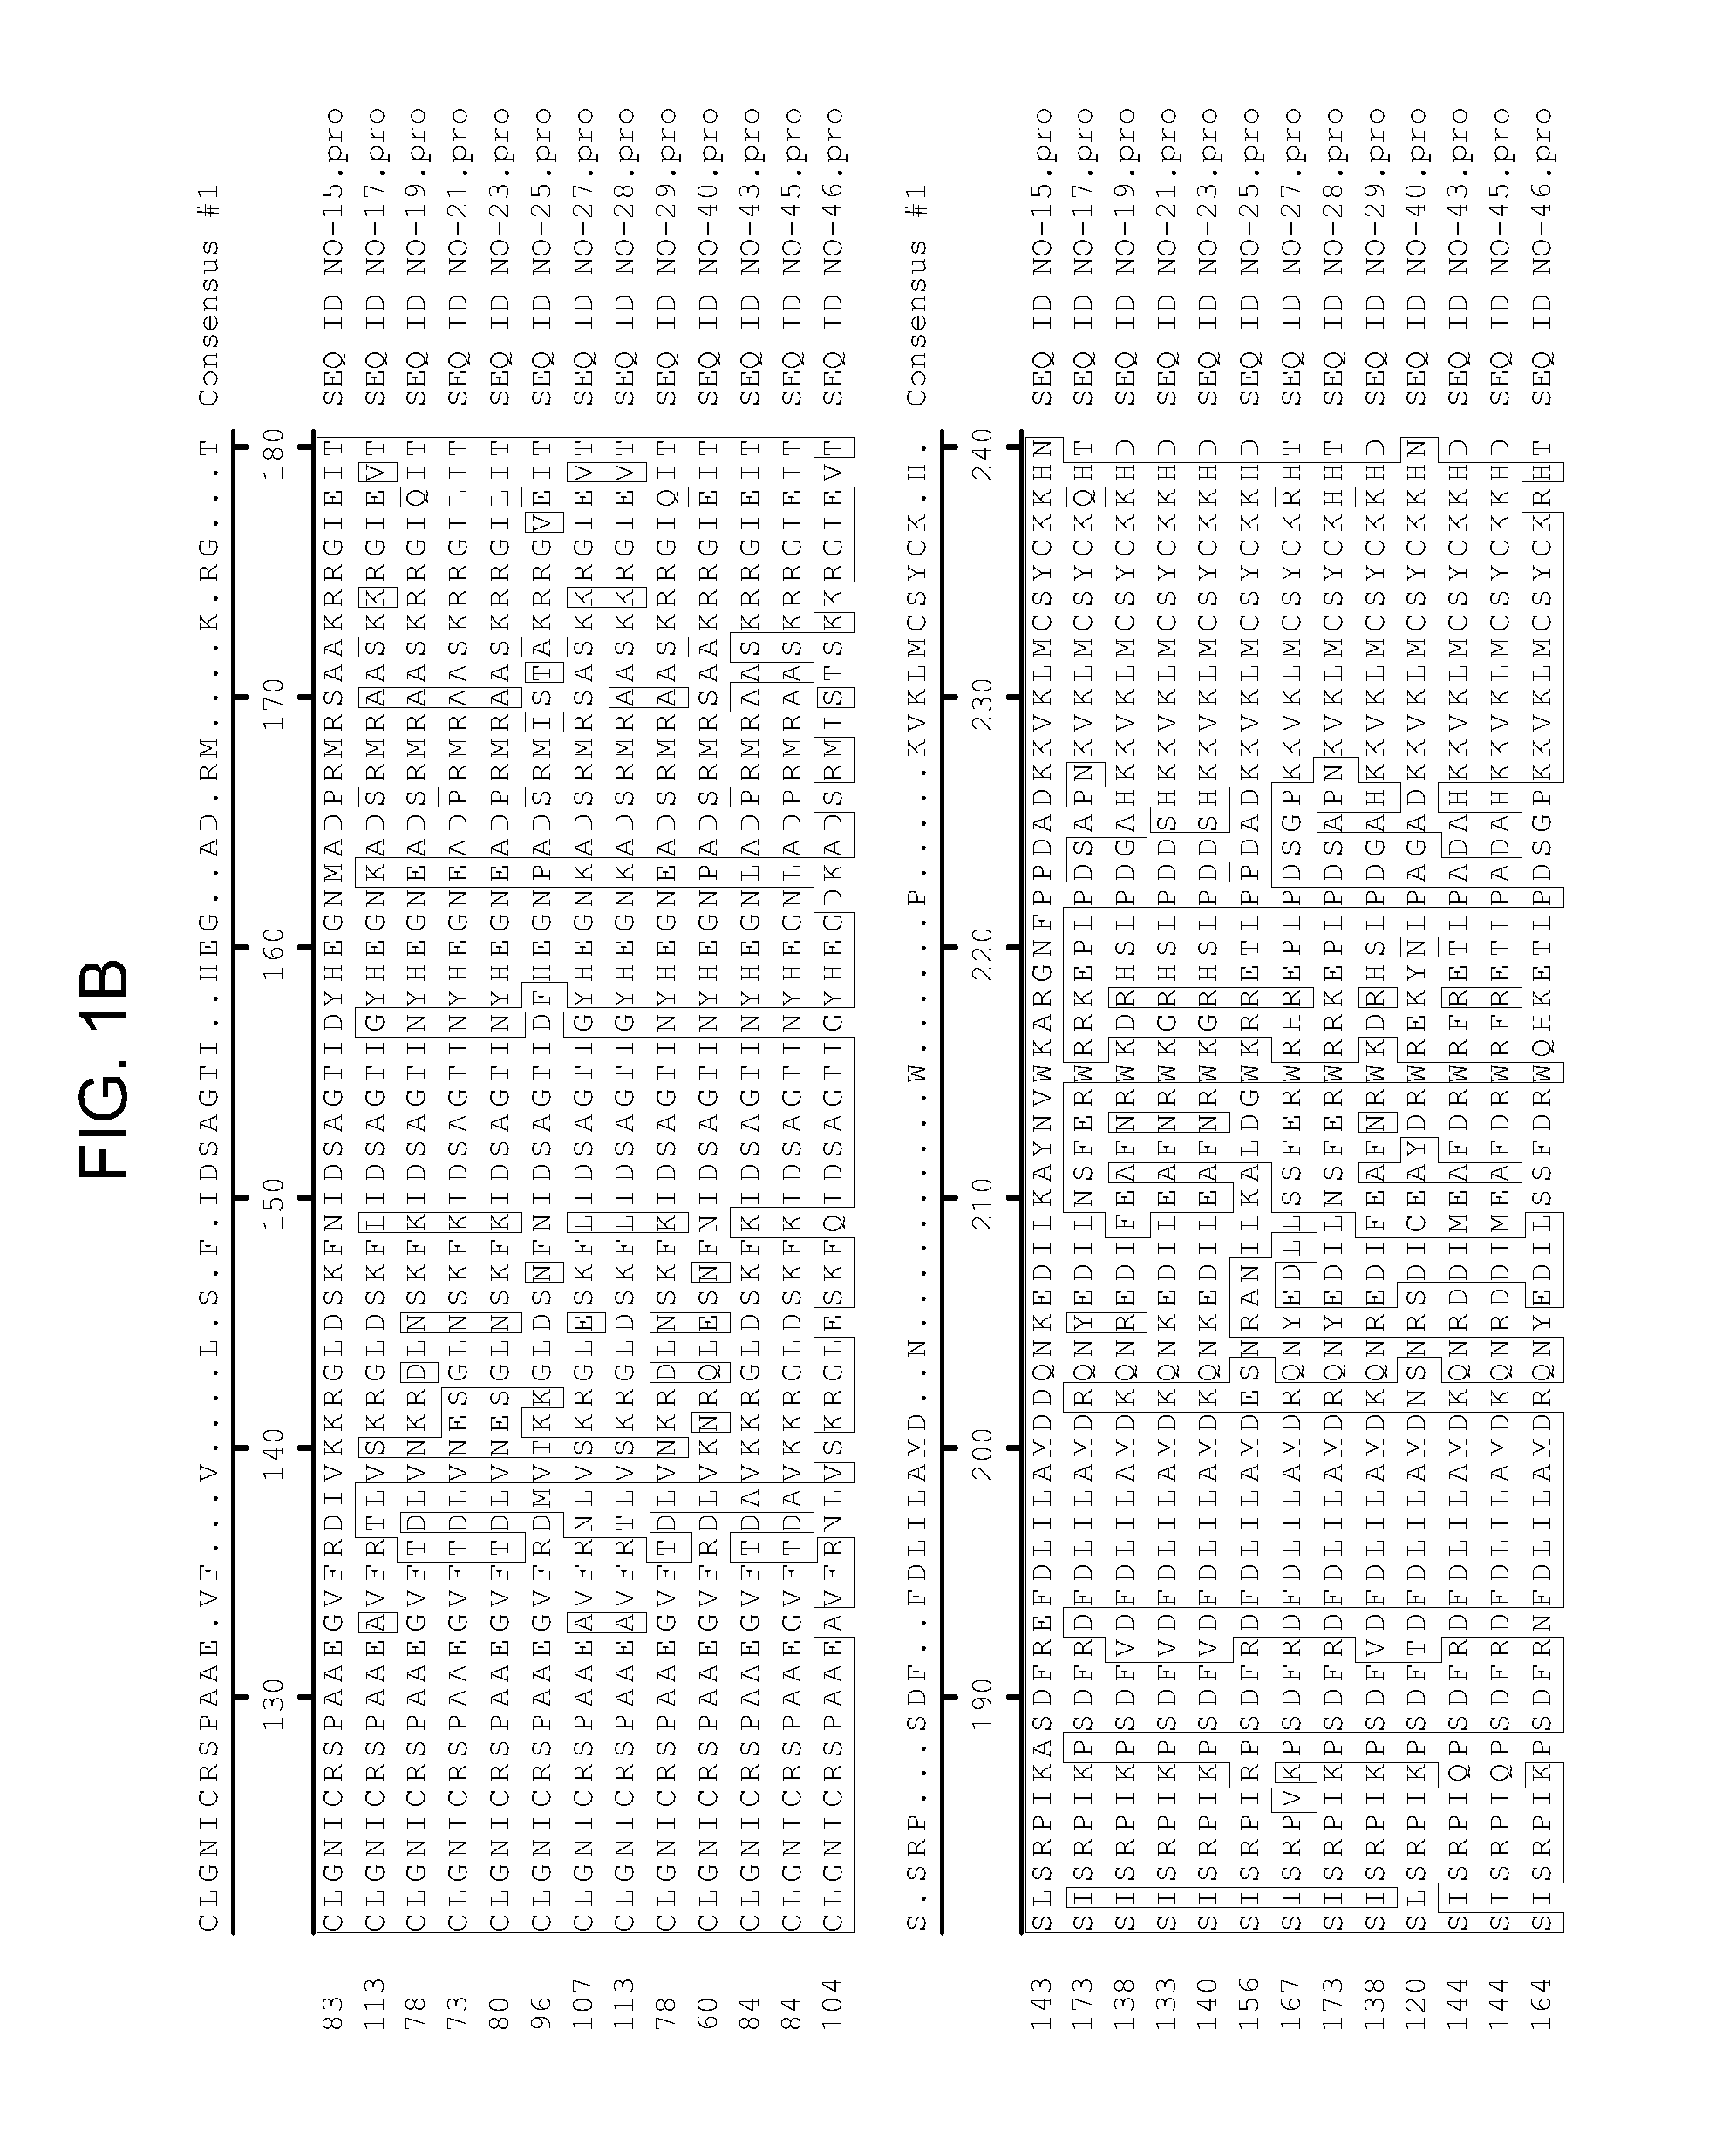 Drought tolerant plants and related constructs and methods involving genes encoding protein tyrosine phosphatases